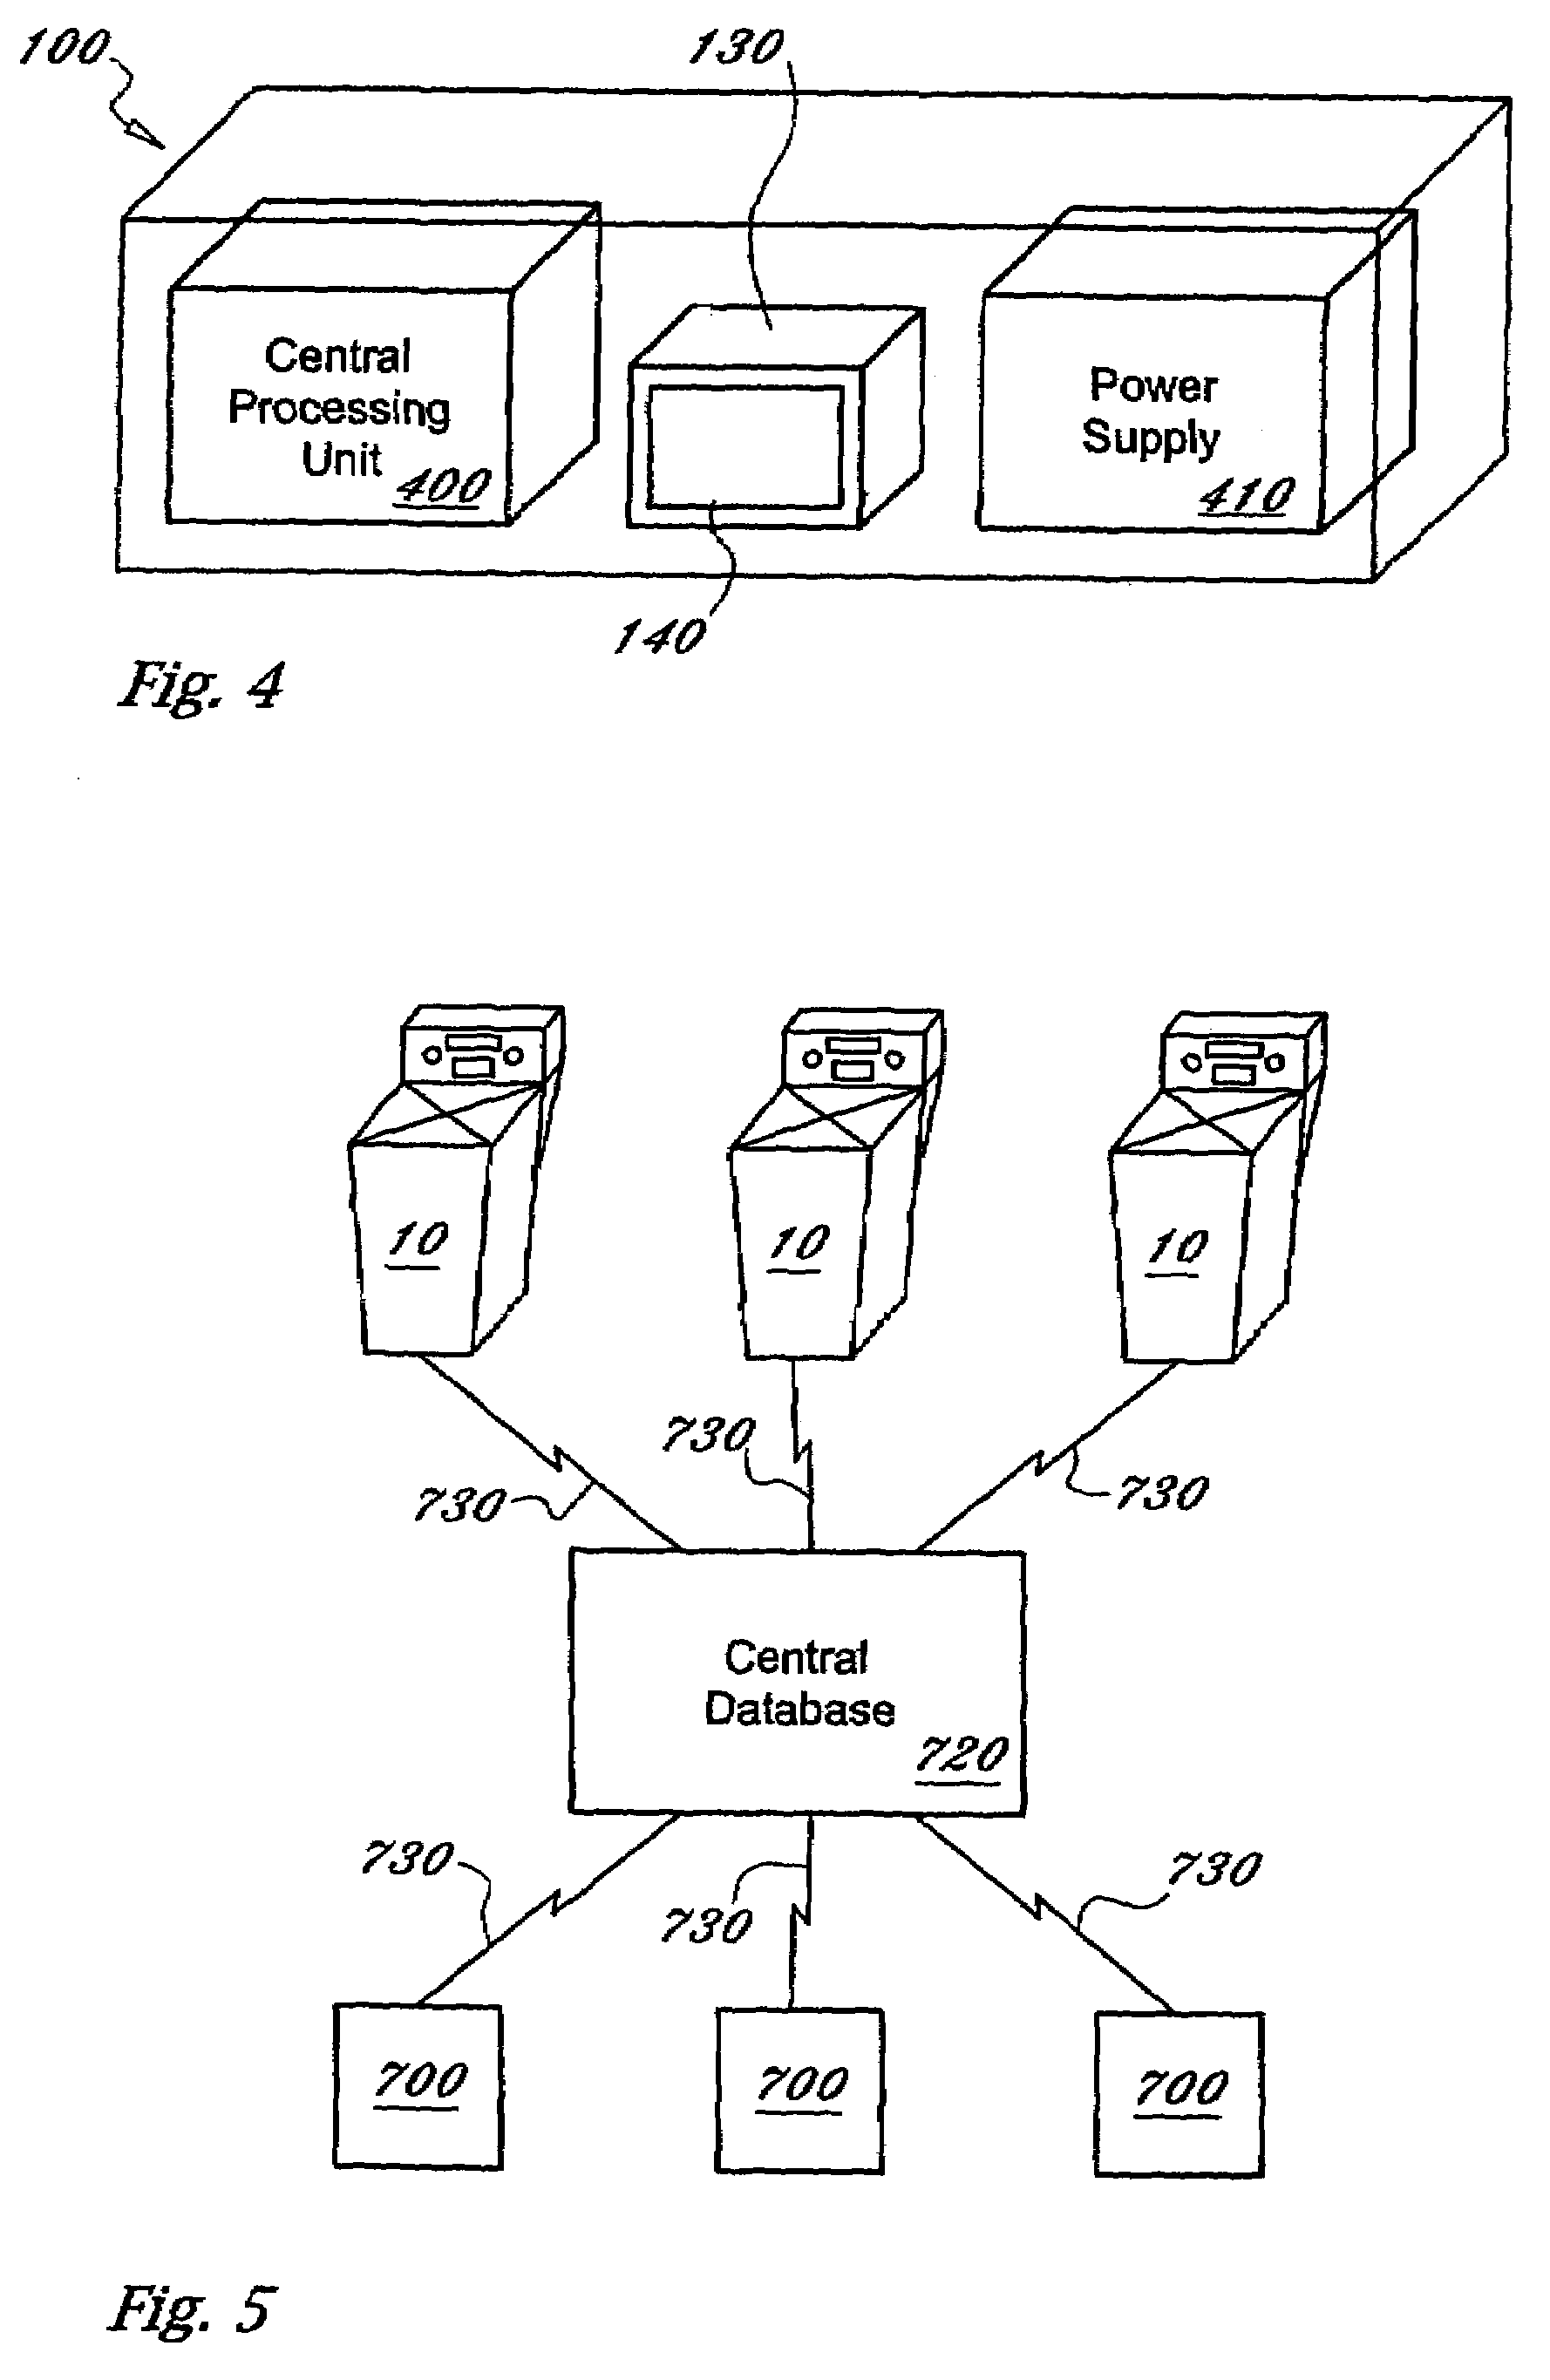 Method and system for disposing of discarded items